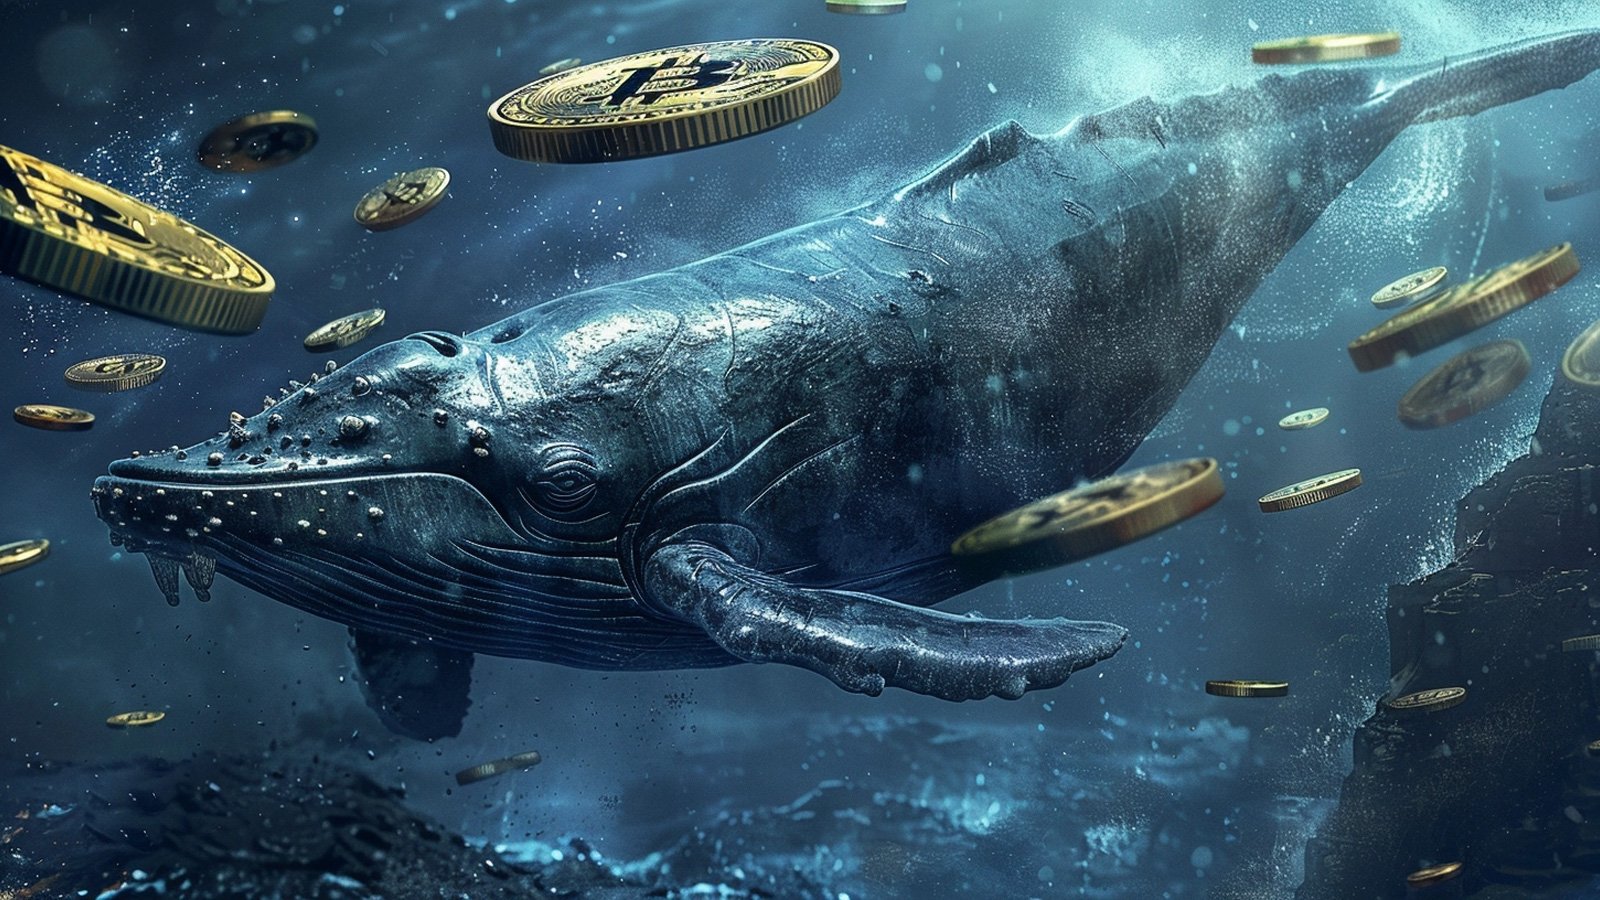 google-ad-impersonates-whales-market-to-push-wallet-drainer-malware